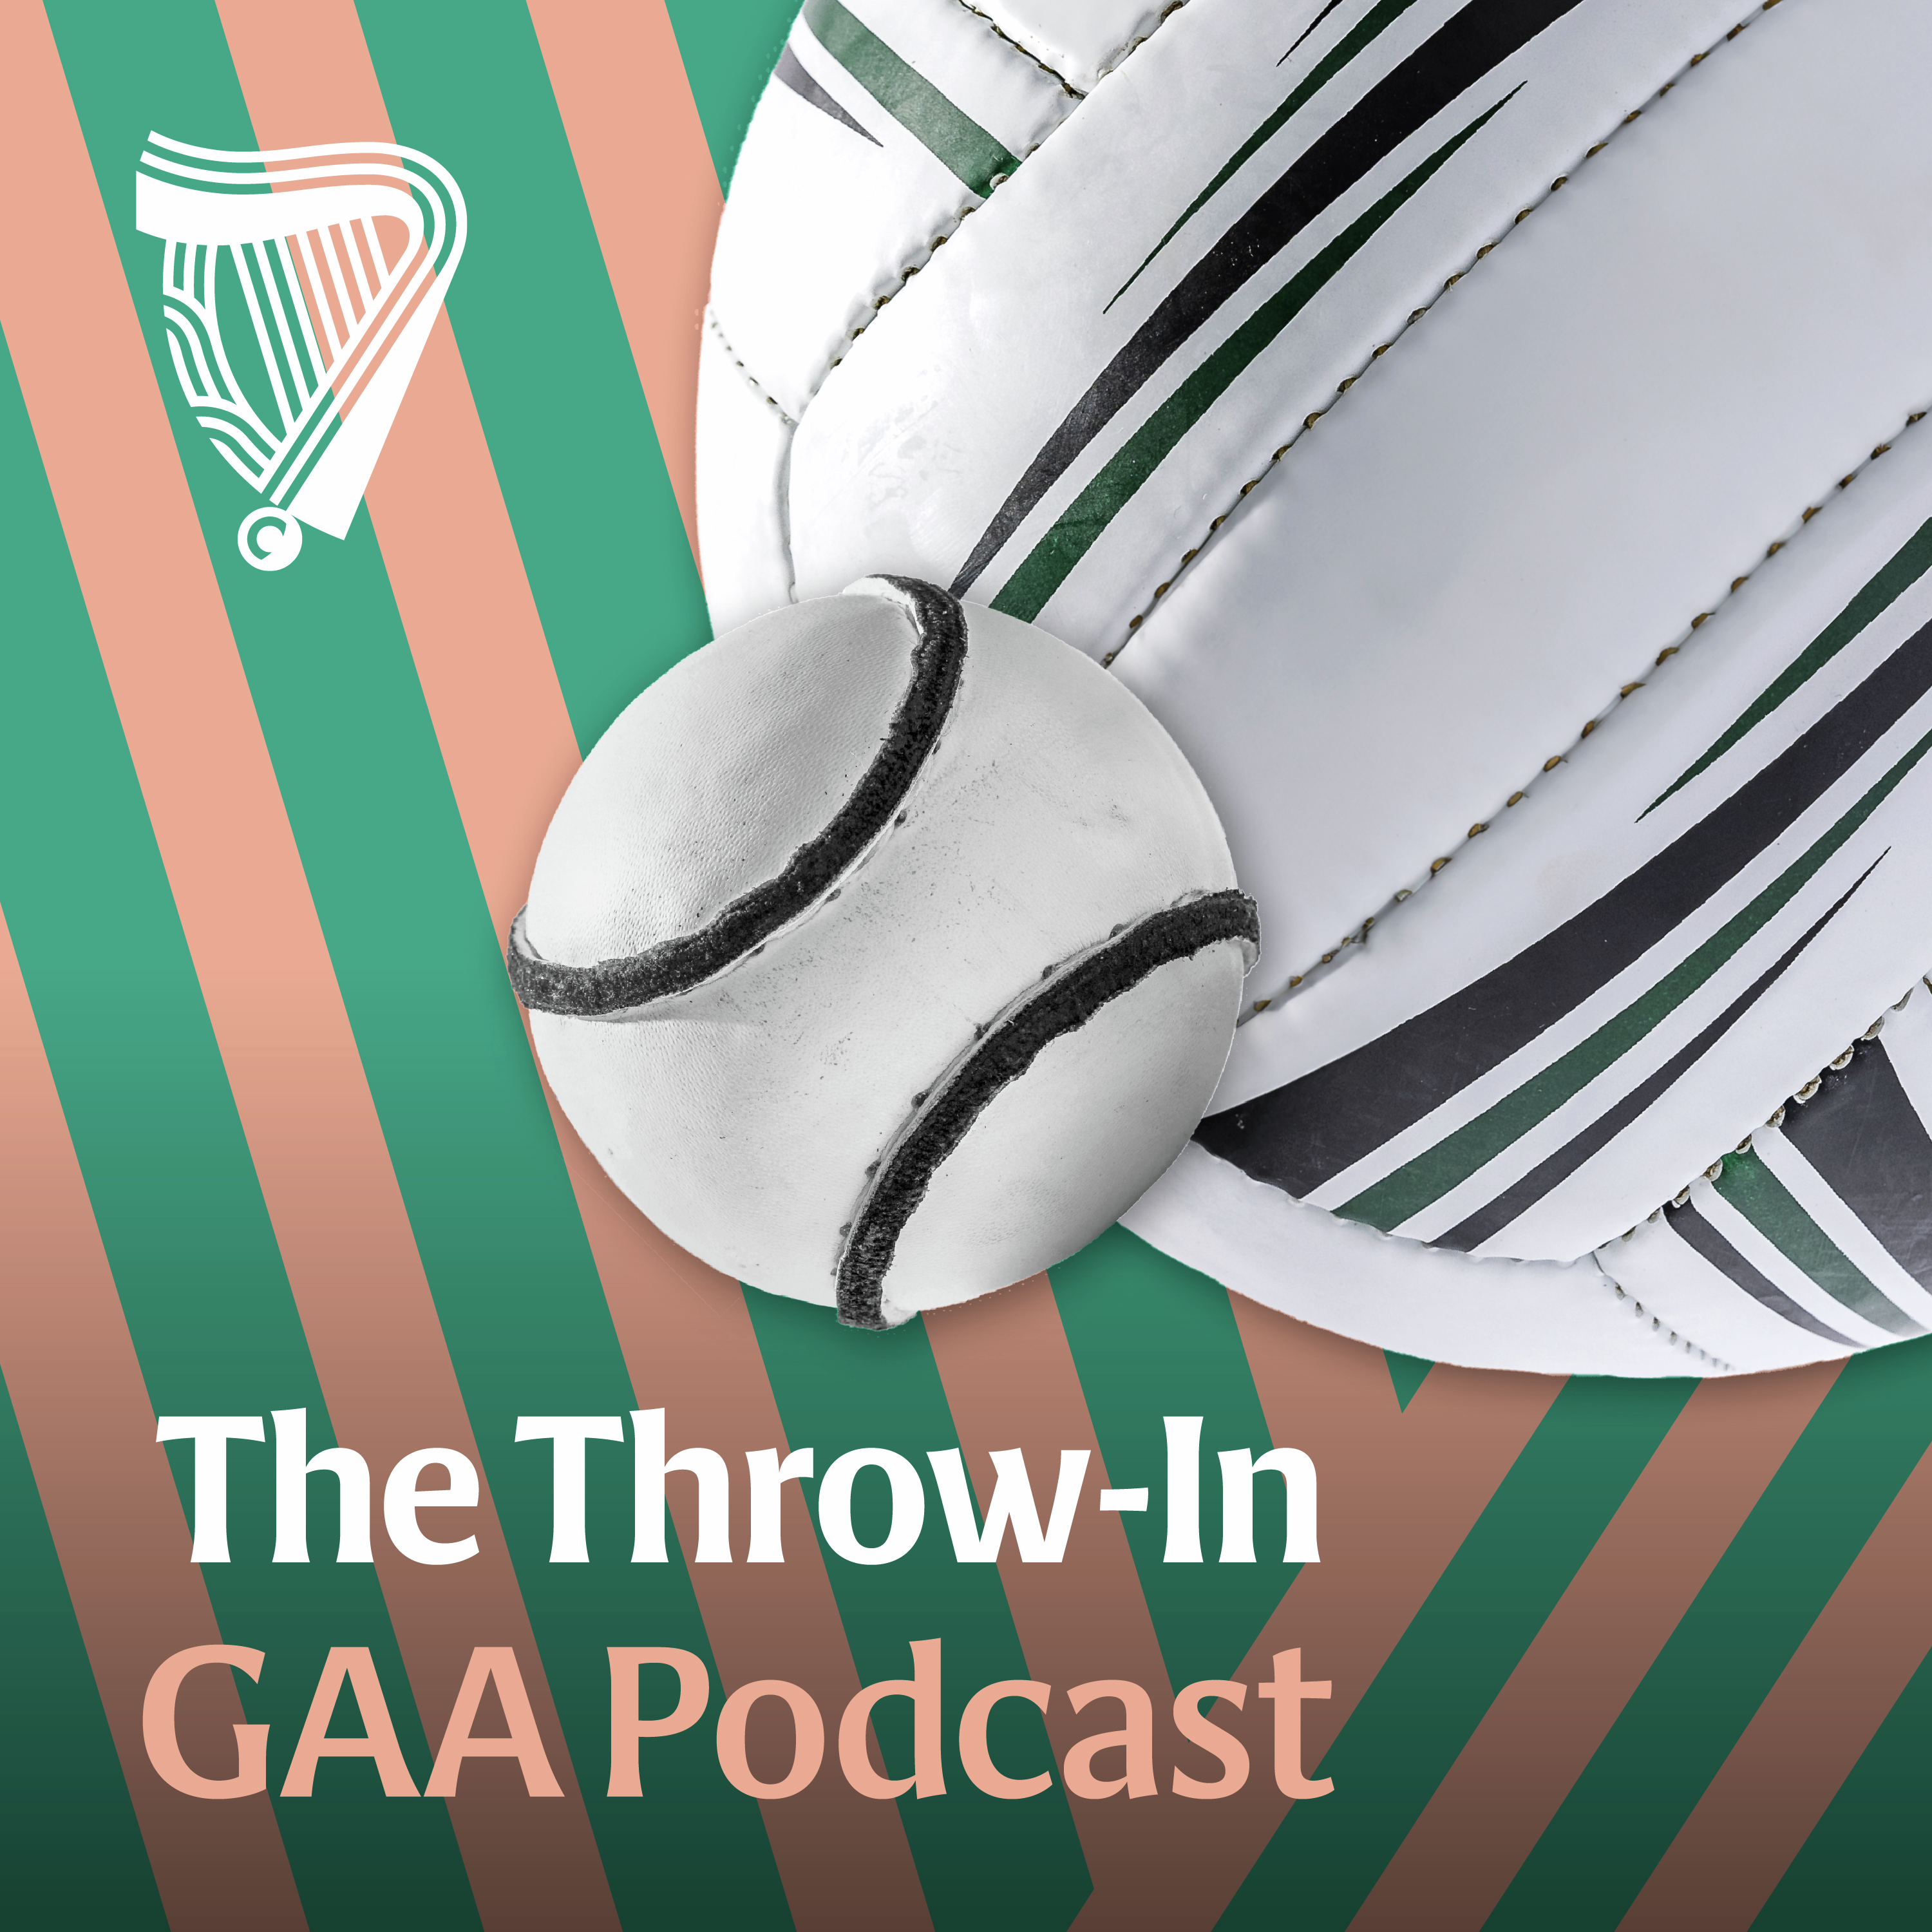 The Throw-In Hurling: Limerick’s off-day or a sign of things to come? And what did Kilkenny get right? Plus, what Clare are building and Masterchef Mullane’s Curragh trip